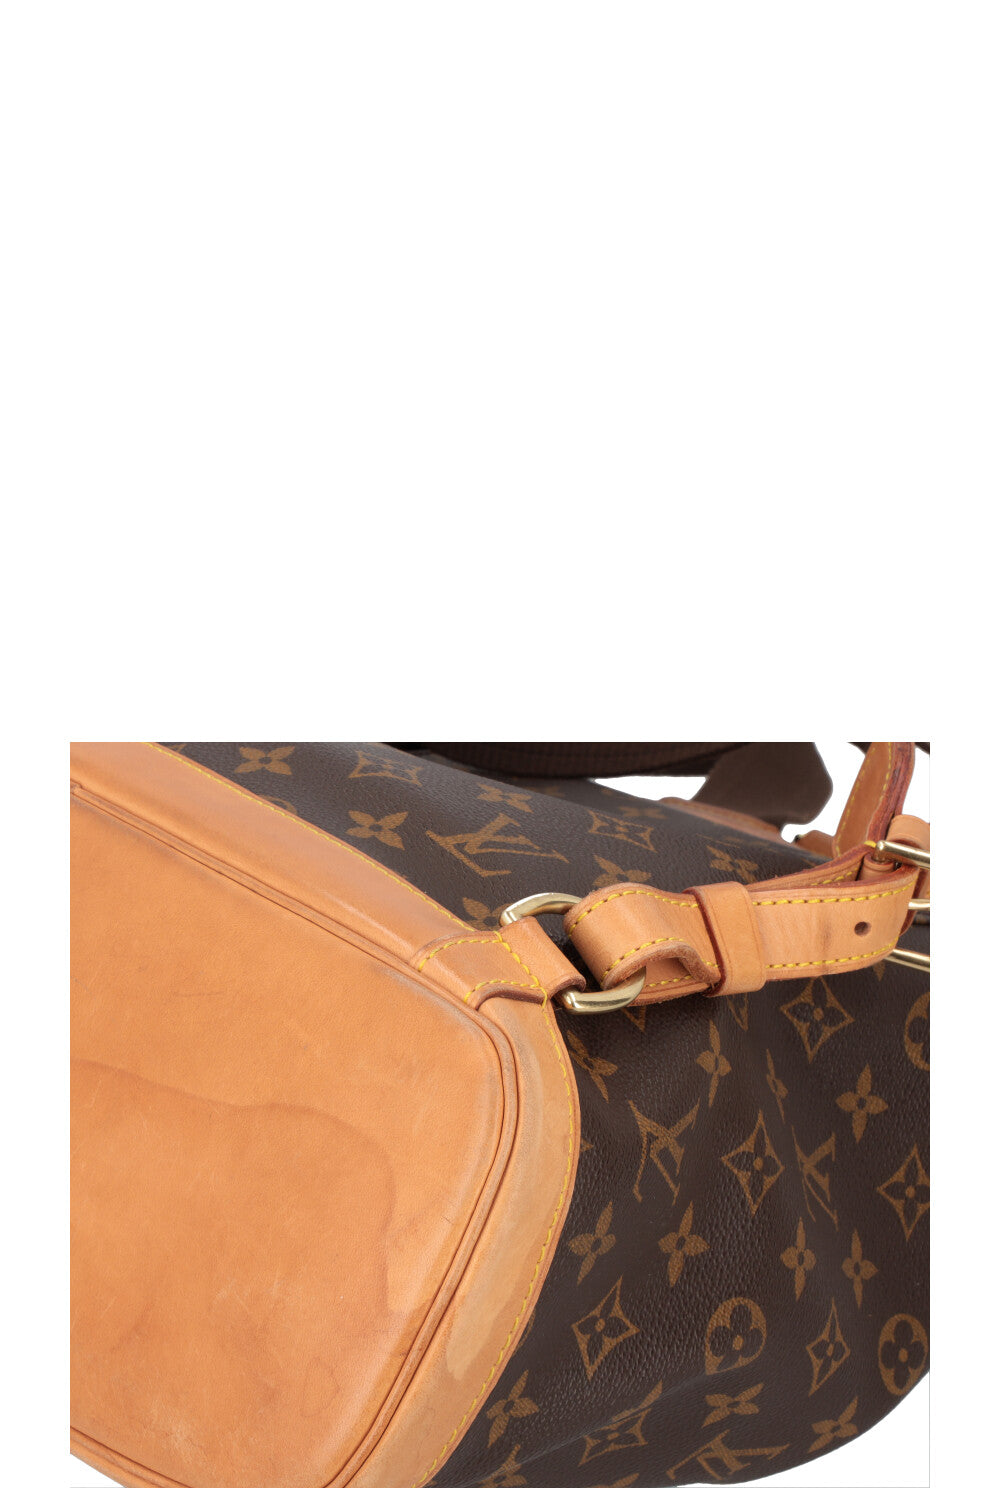 LOUIS VUITTON Montsouris GM Backpack MNG